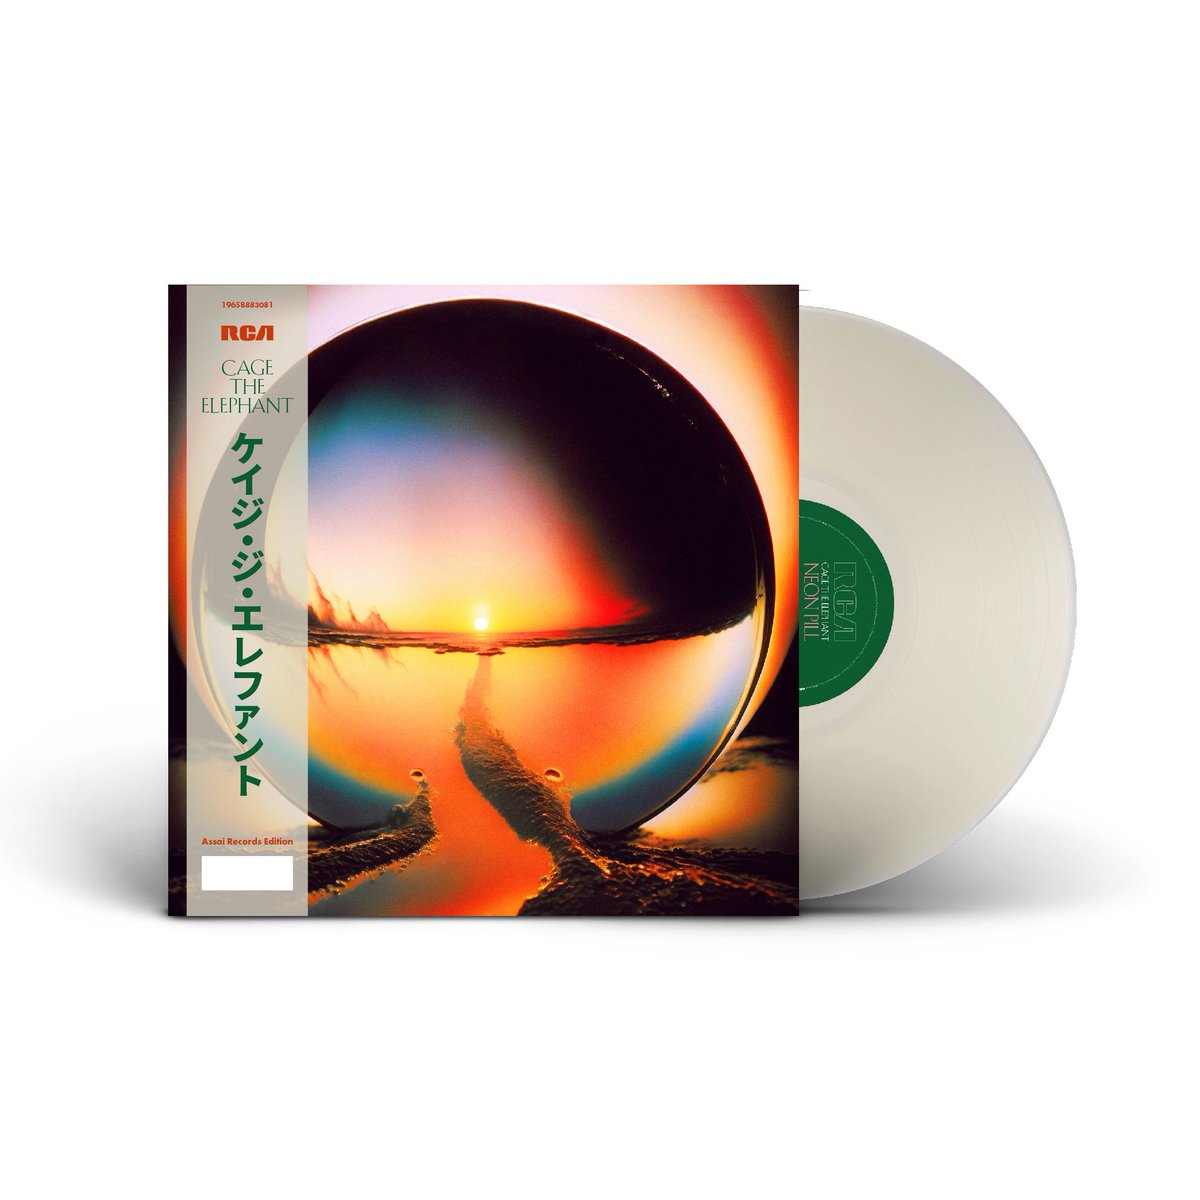 CAGE THE ELEPHANT | ASSAI OBI EDITION 🐘 'Neon Pill' - out 17/05/24 🐘 Assai Exclusive Japanese-ispired obi strip 🐘 Ltd to 200 copies 🐘 Milky clear vinyl 🐘 Hand-numbered Pre-order: tinyurl.com/CTEAssaiObi @CageTheElephant @RCARecords @Assai_UK